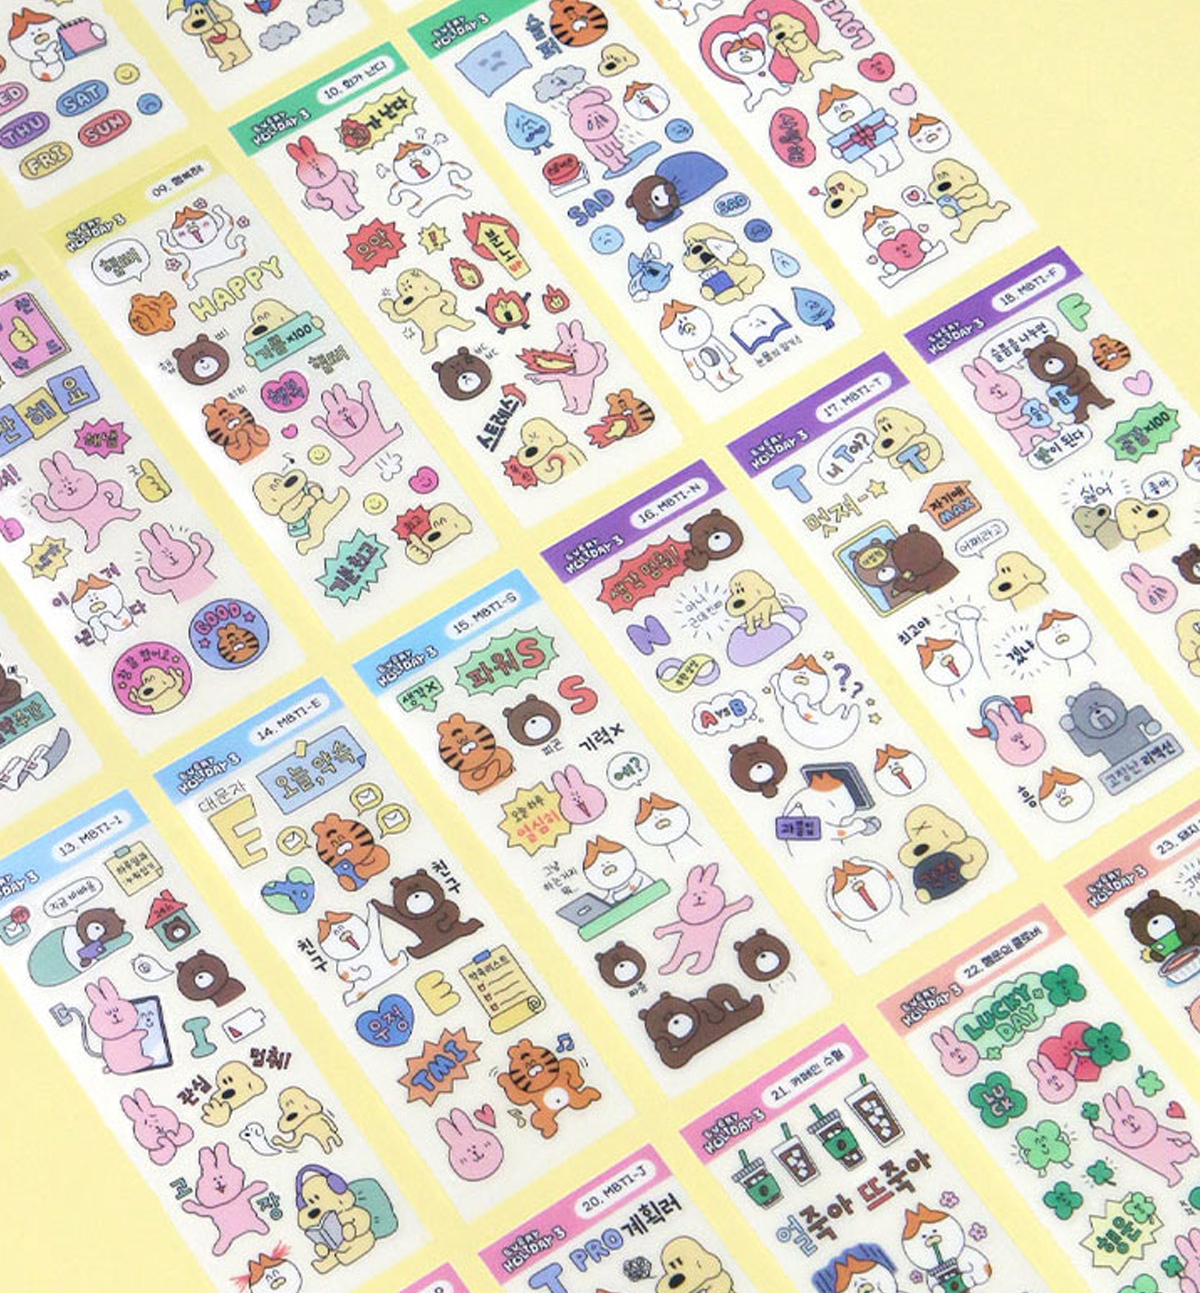 Every Holiday Sticker Set Ver. 3 [41 Stickers]